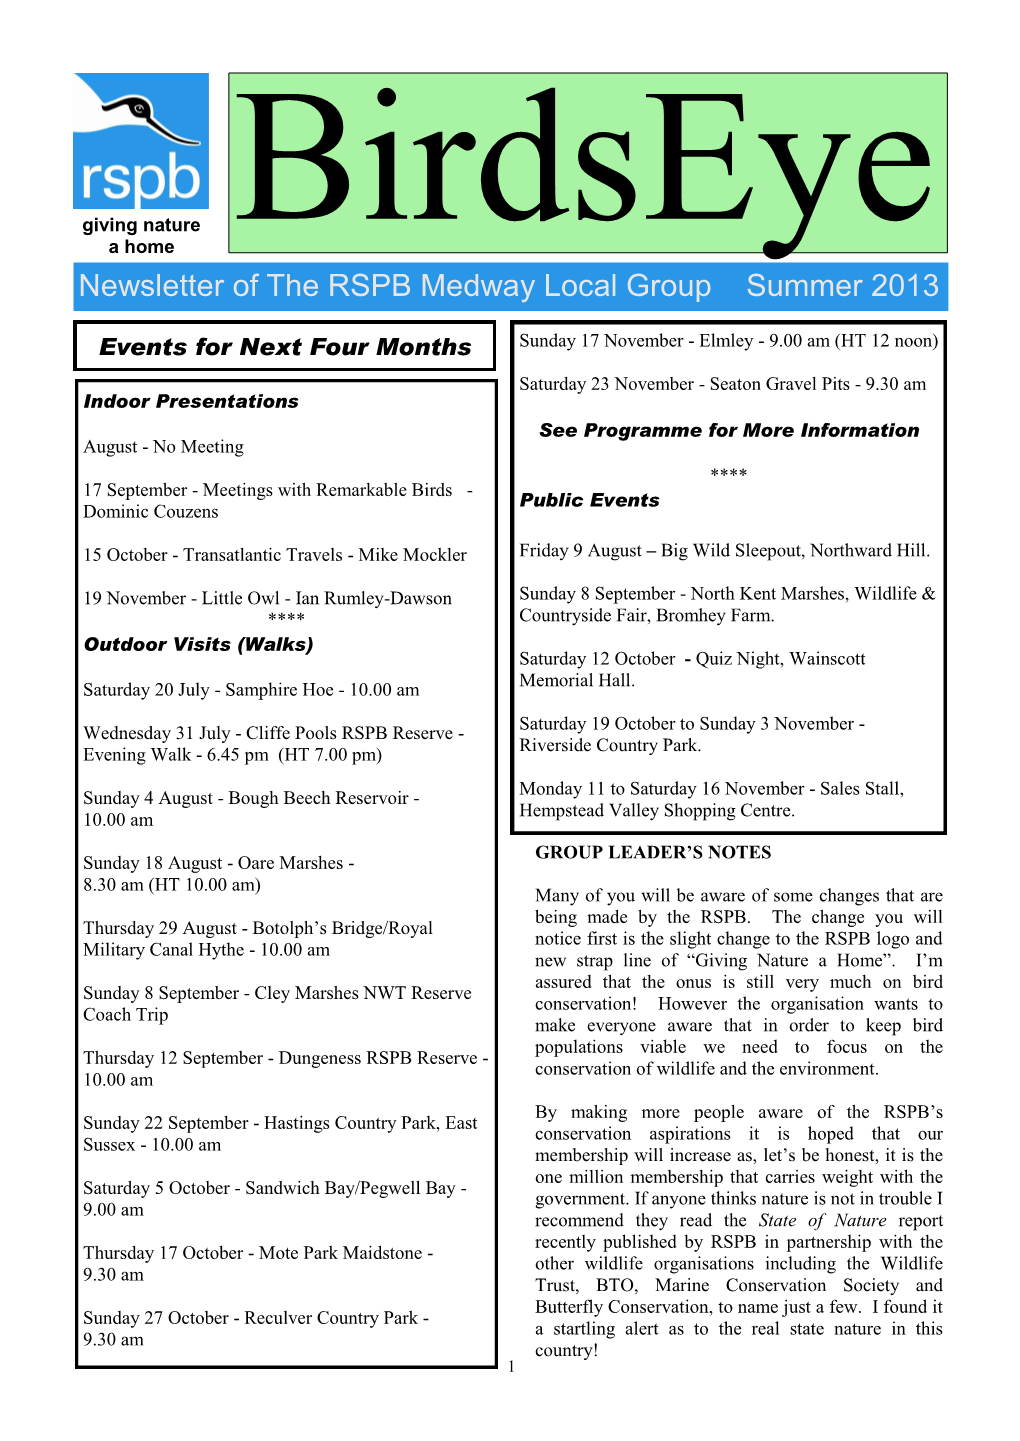 Newsletter of the RSPB Medway Local Group Summer 2013